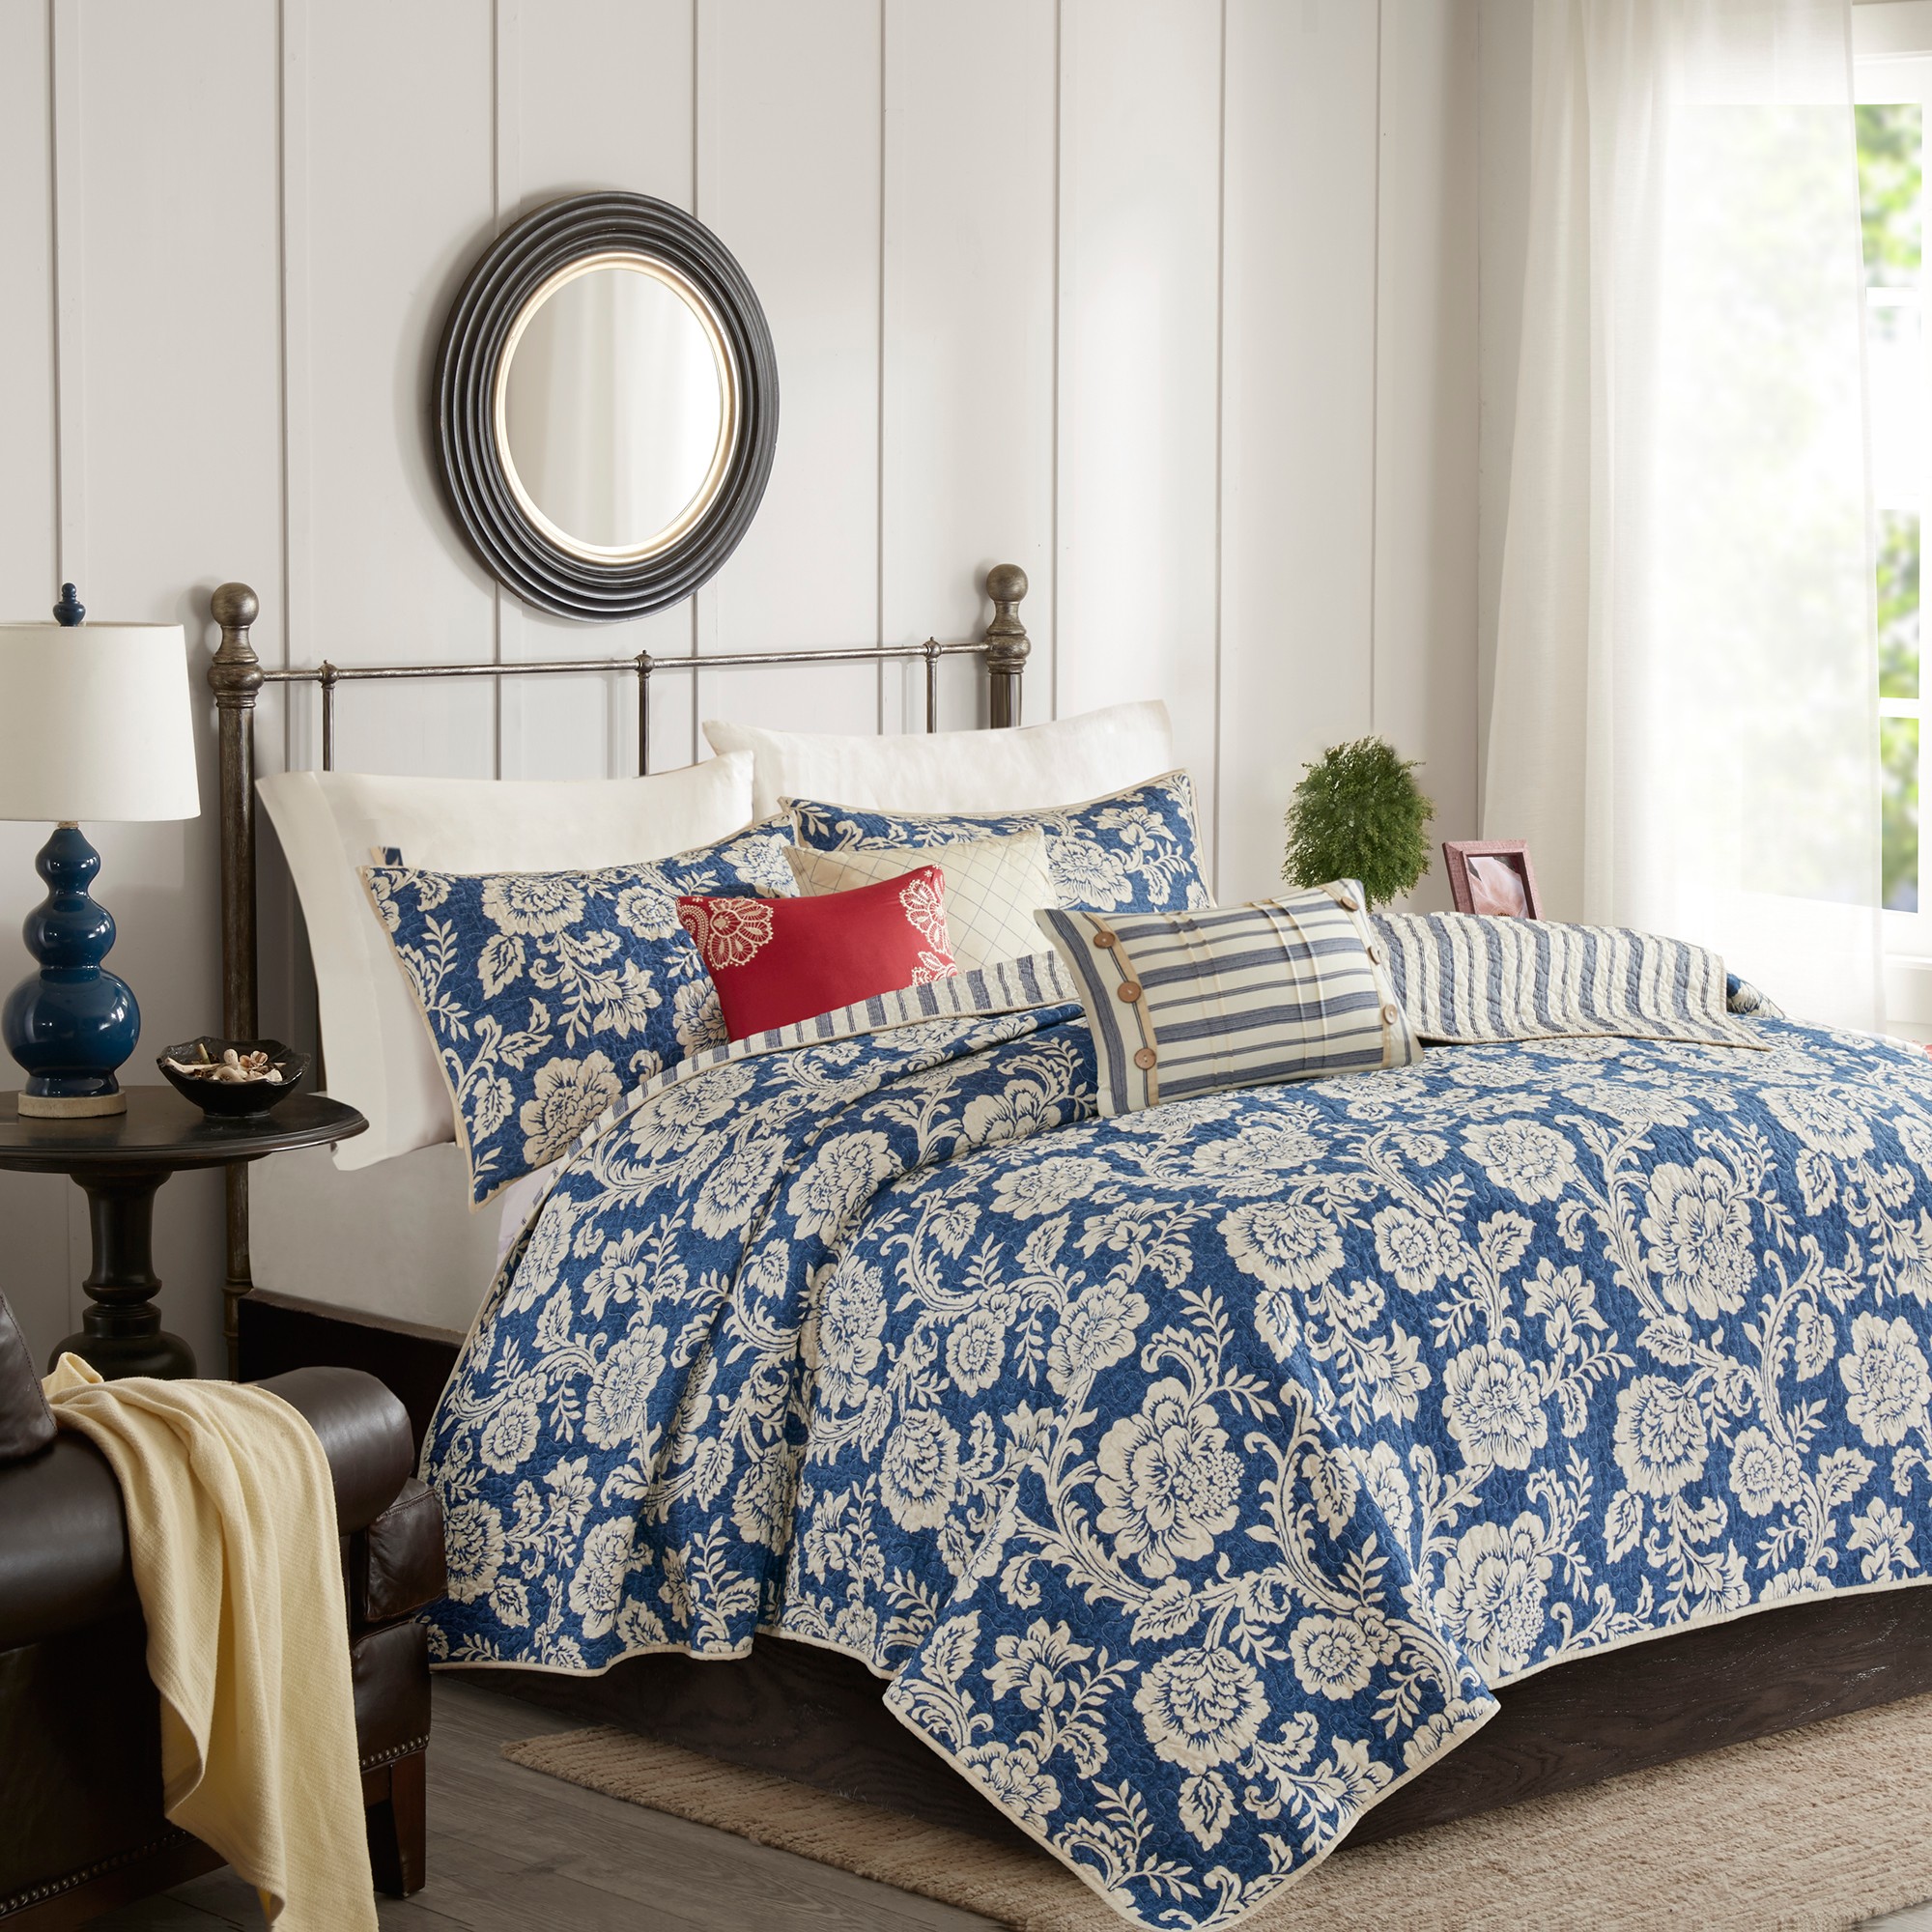 Reversible Bedding to Refresh Your Room!